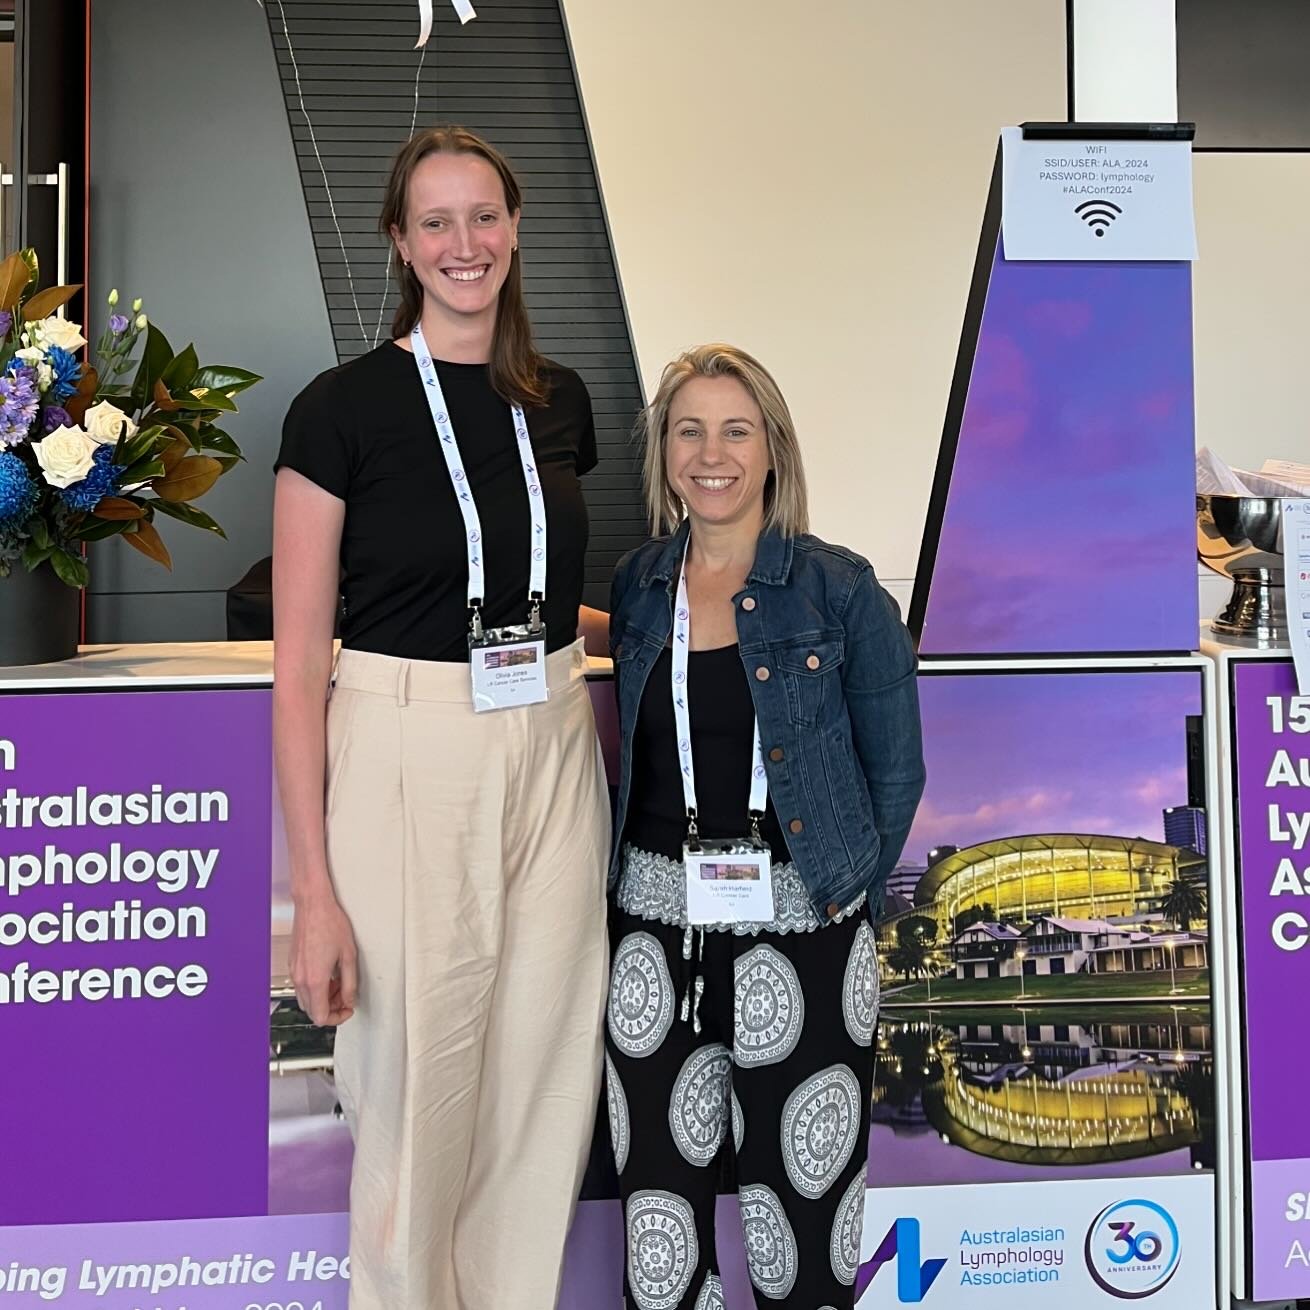 Sarah and Olivia, two of our dedicated Lymphoedema Physiotherapists, attended the 15th Australasian Lymphology Association (ALA) Scientific Conference, which was hosted at the Adelaide Convention Centre from May 1st to 4th. Themed around &lsquo;shapi